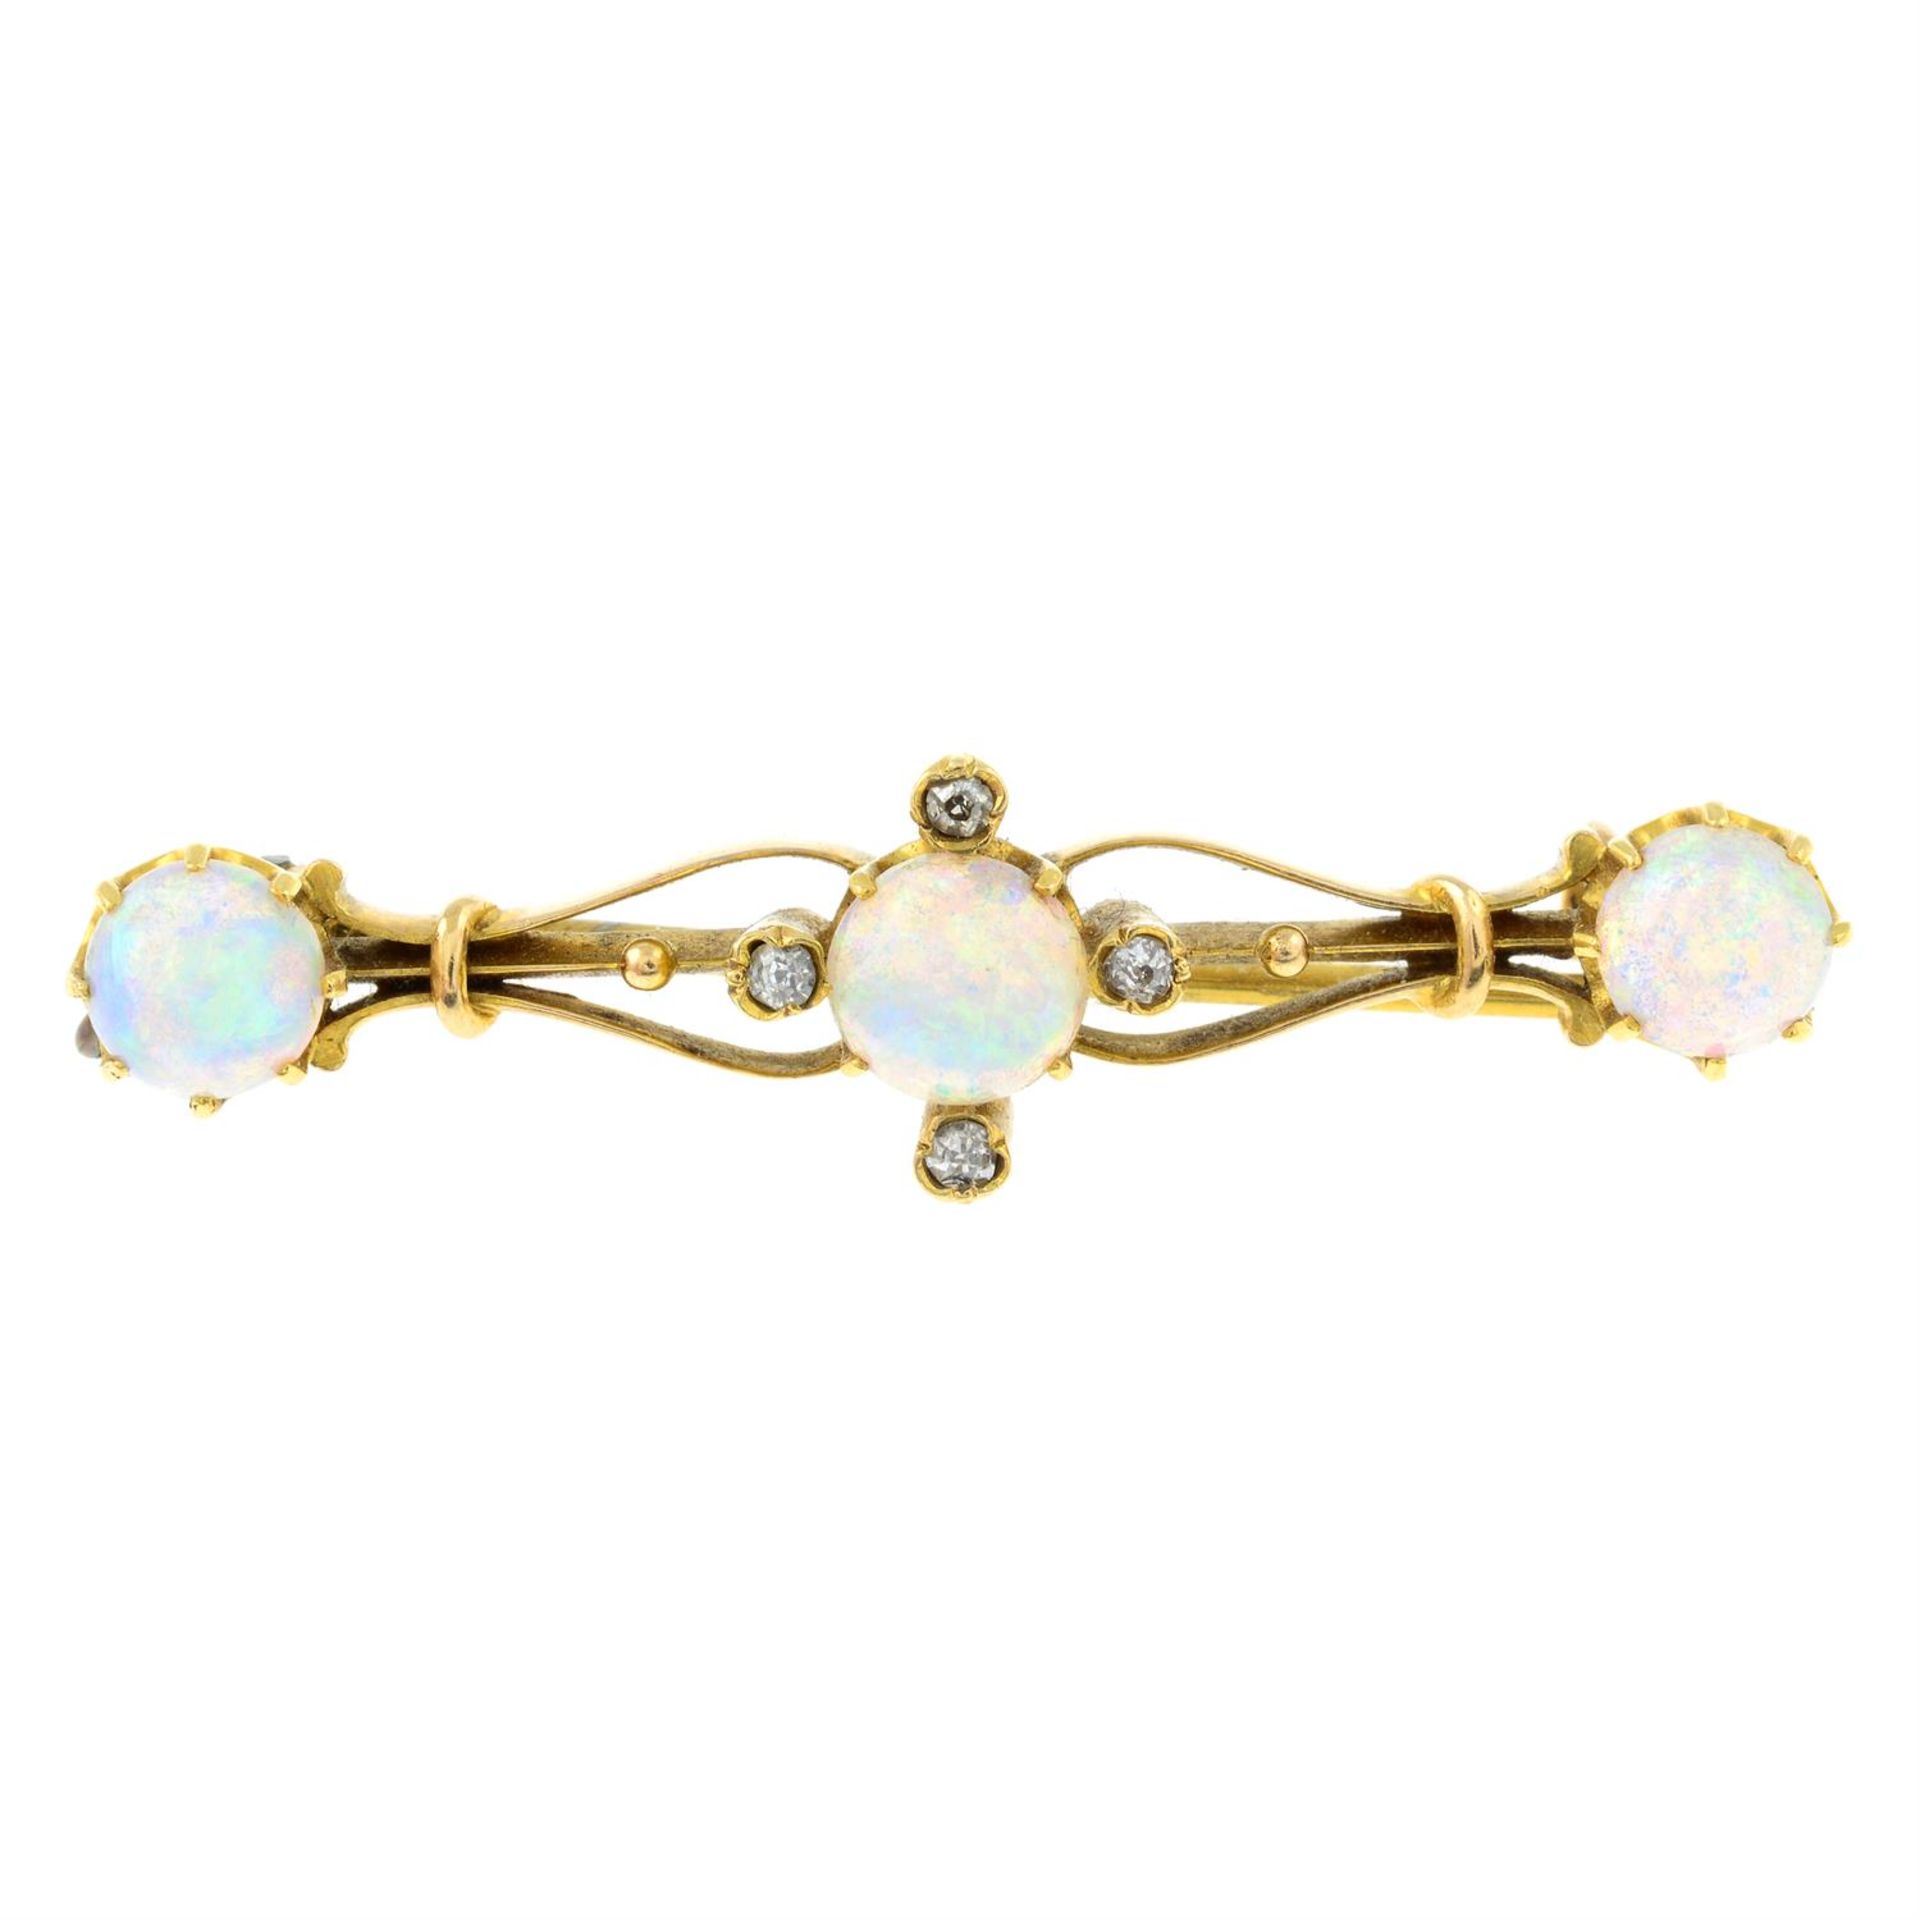 An early 20th century 18ct gold opal and old-cut diamond brooch.